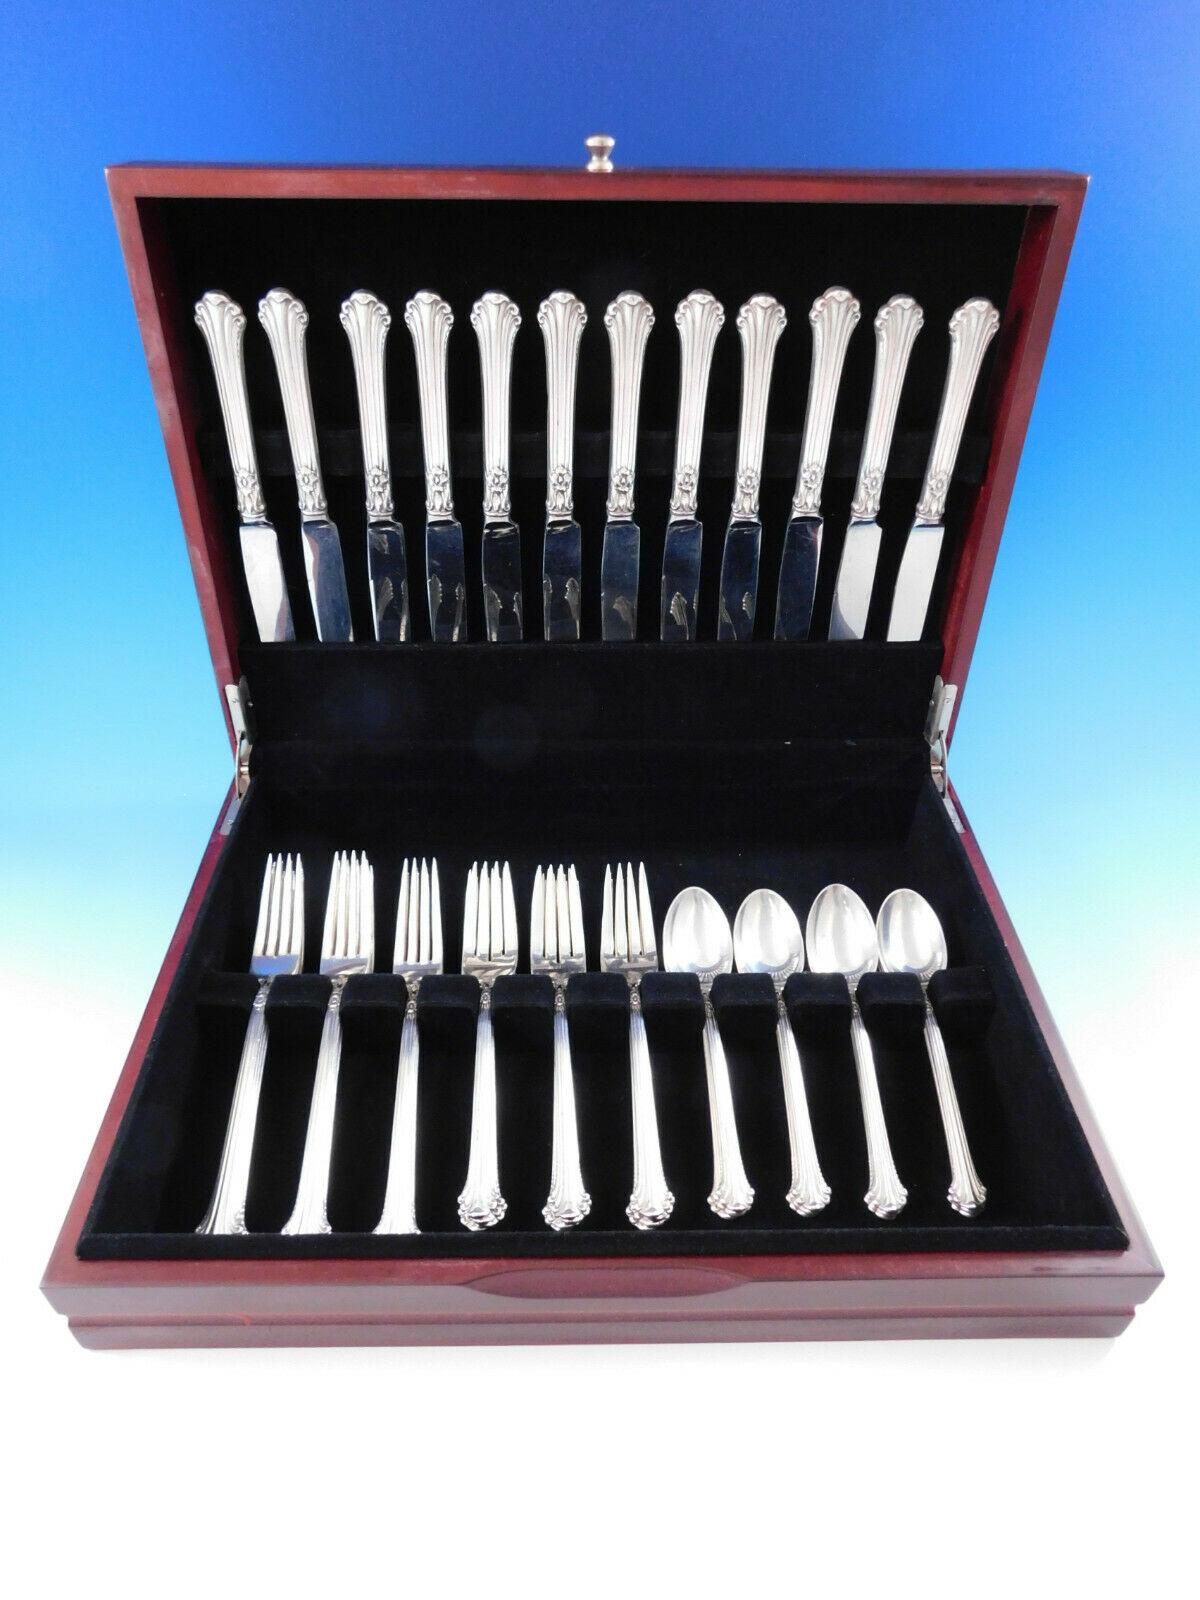 Silver plumes by Towle sterling silver flatware set, 48 pieces. This set includes:

12 knives, 8 3/4